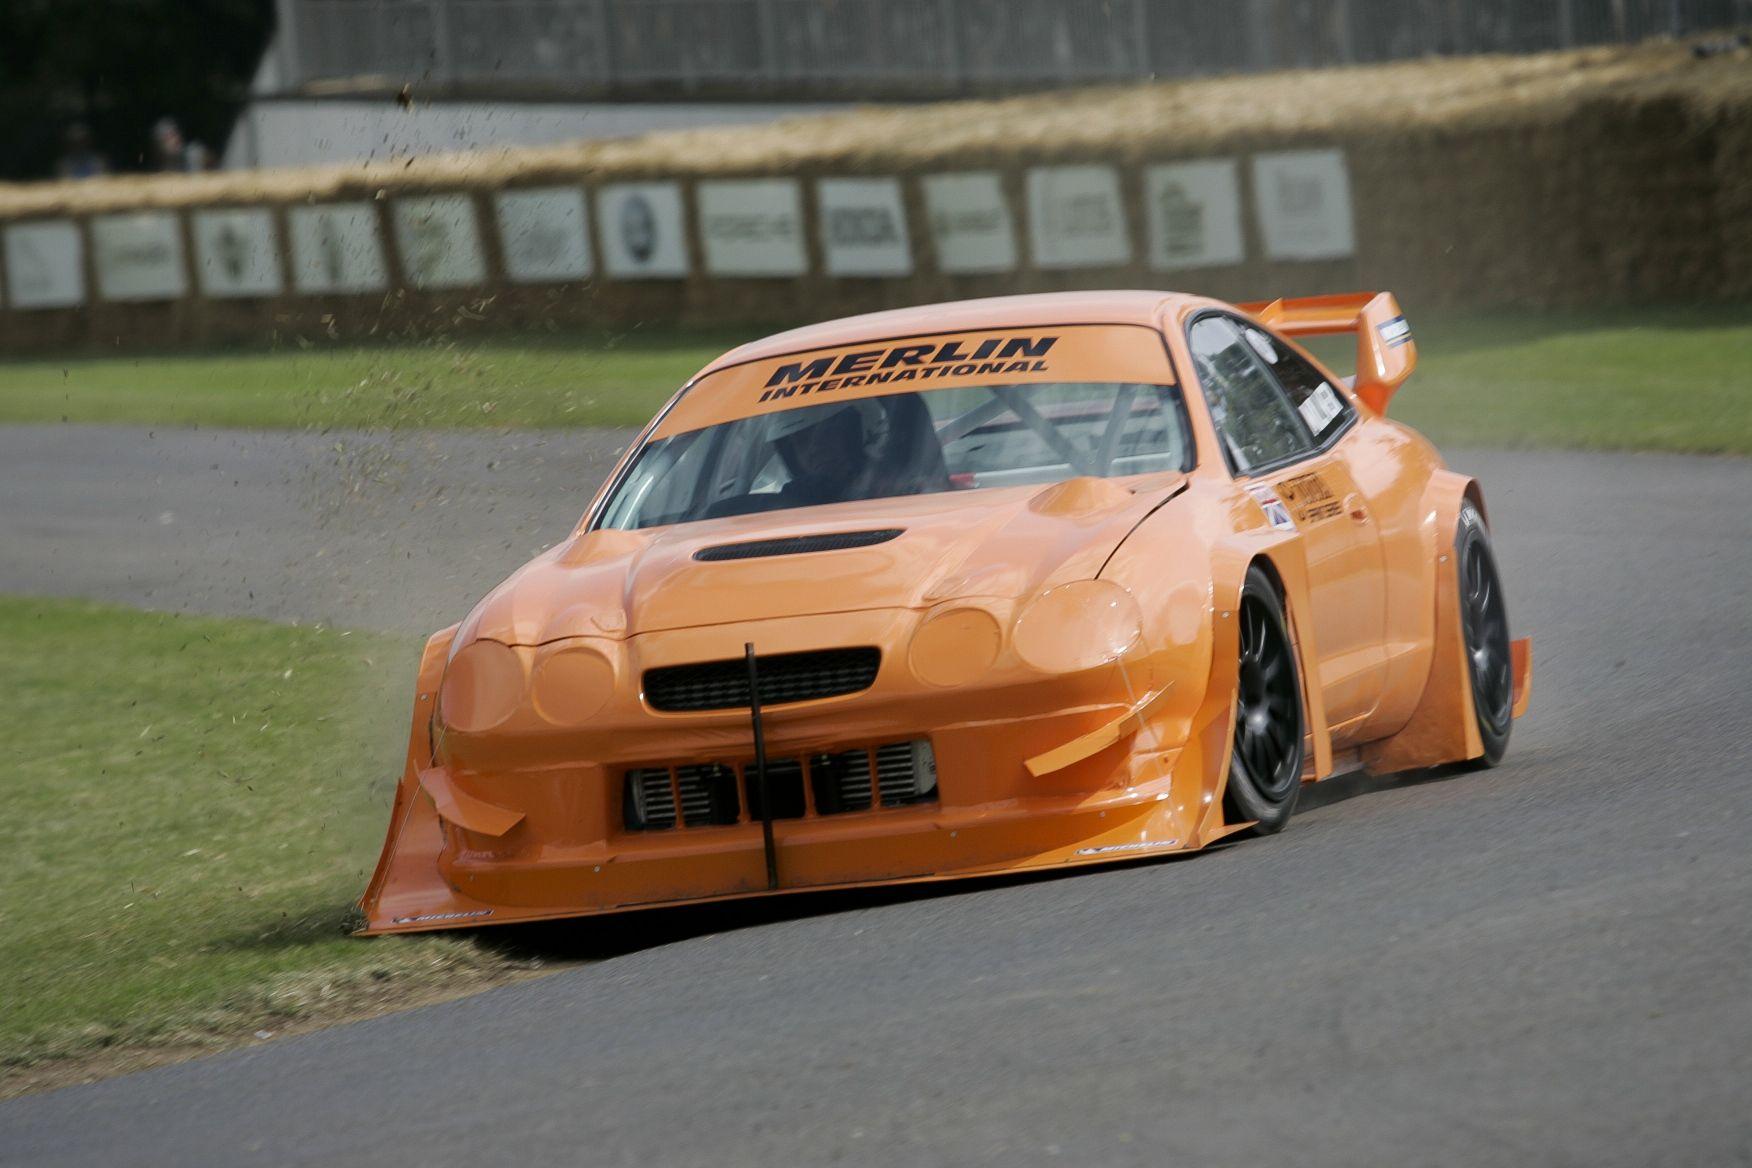 850hp Toyota Celica Is Fastest Hill Climber at 2011 Goodwood